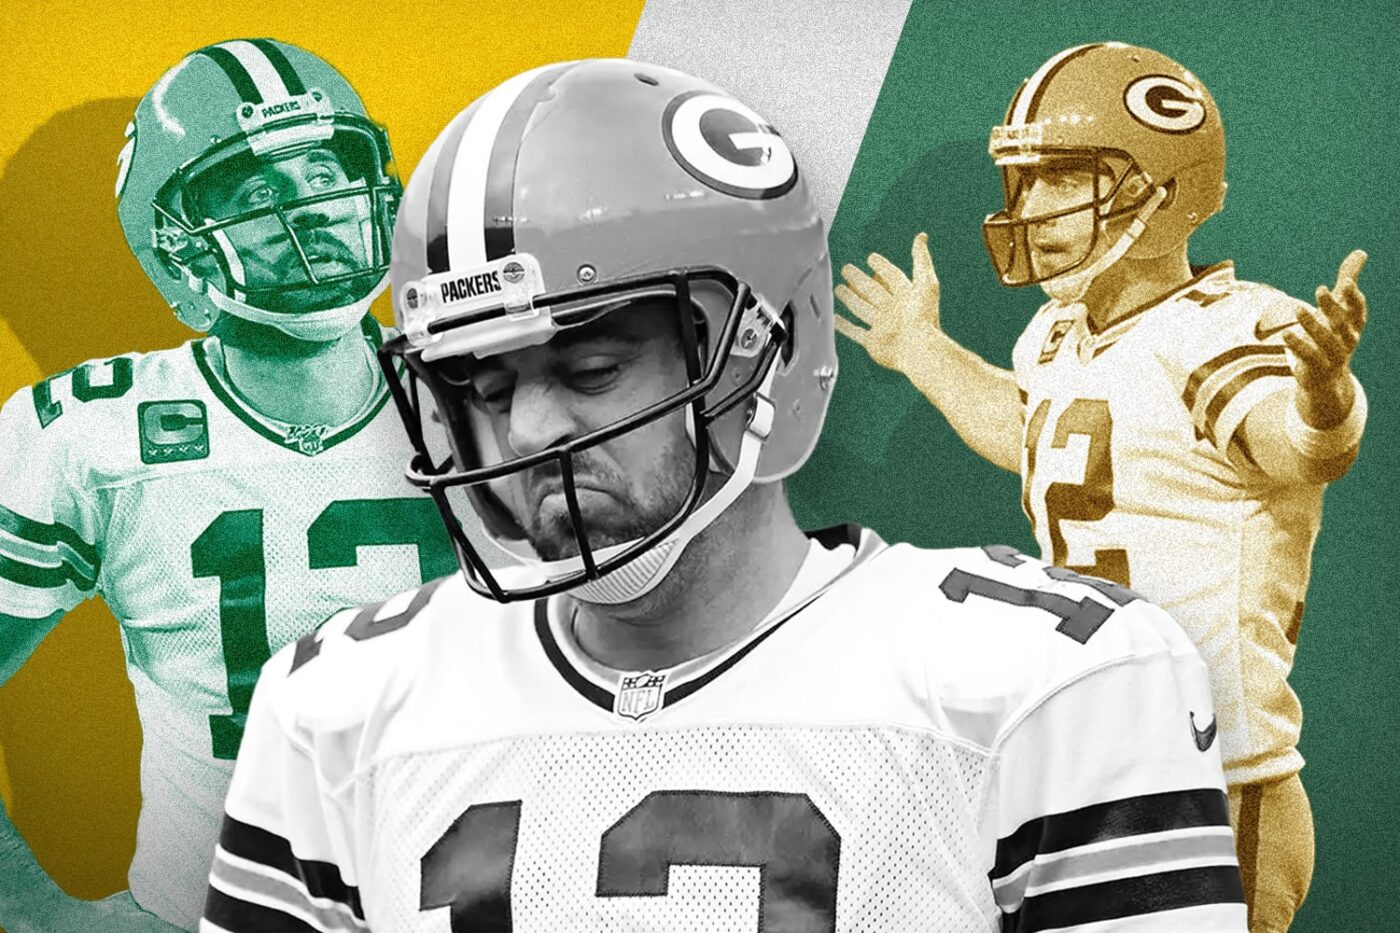 Here’s How New York Jets Can Avoid Paying Aaron Rodgers The $75 Million They Owe